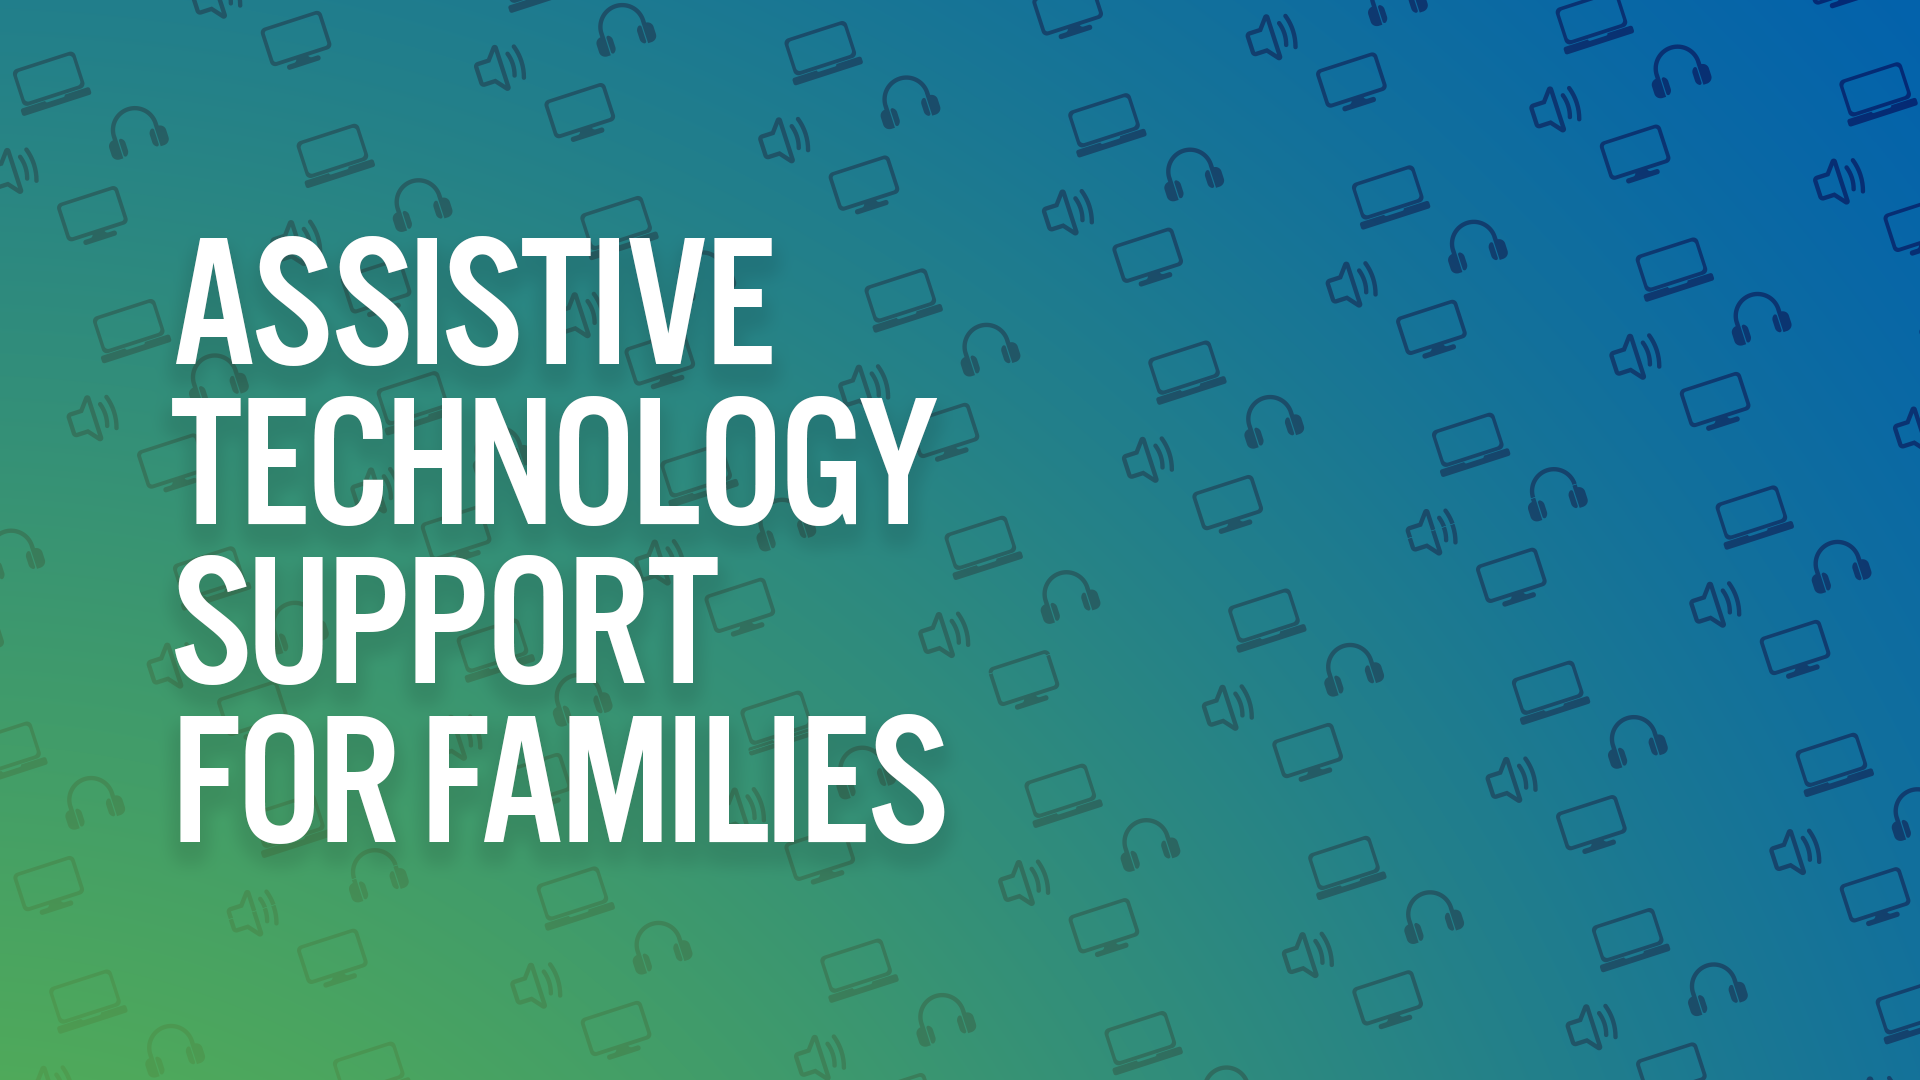 Assistive Technology Support for Families